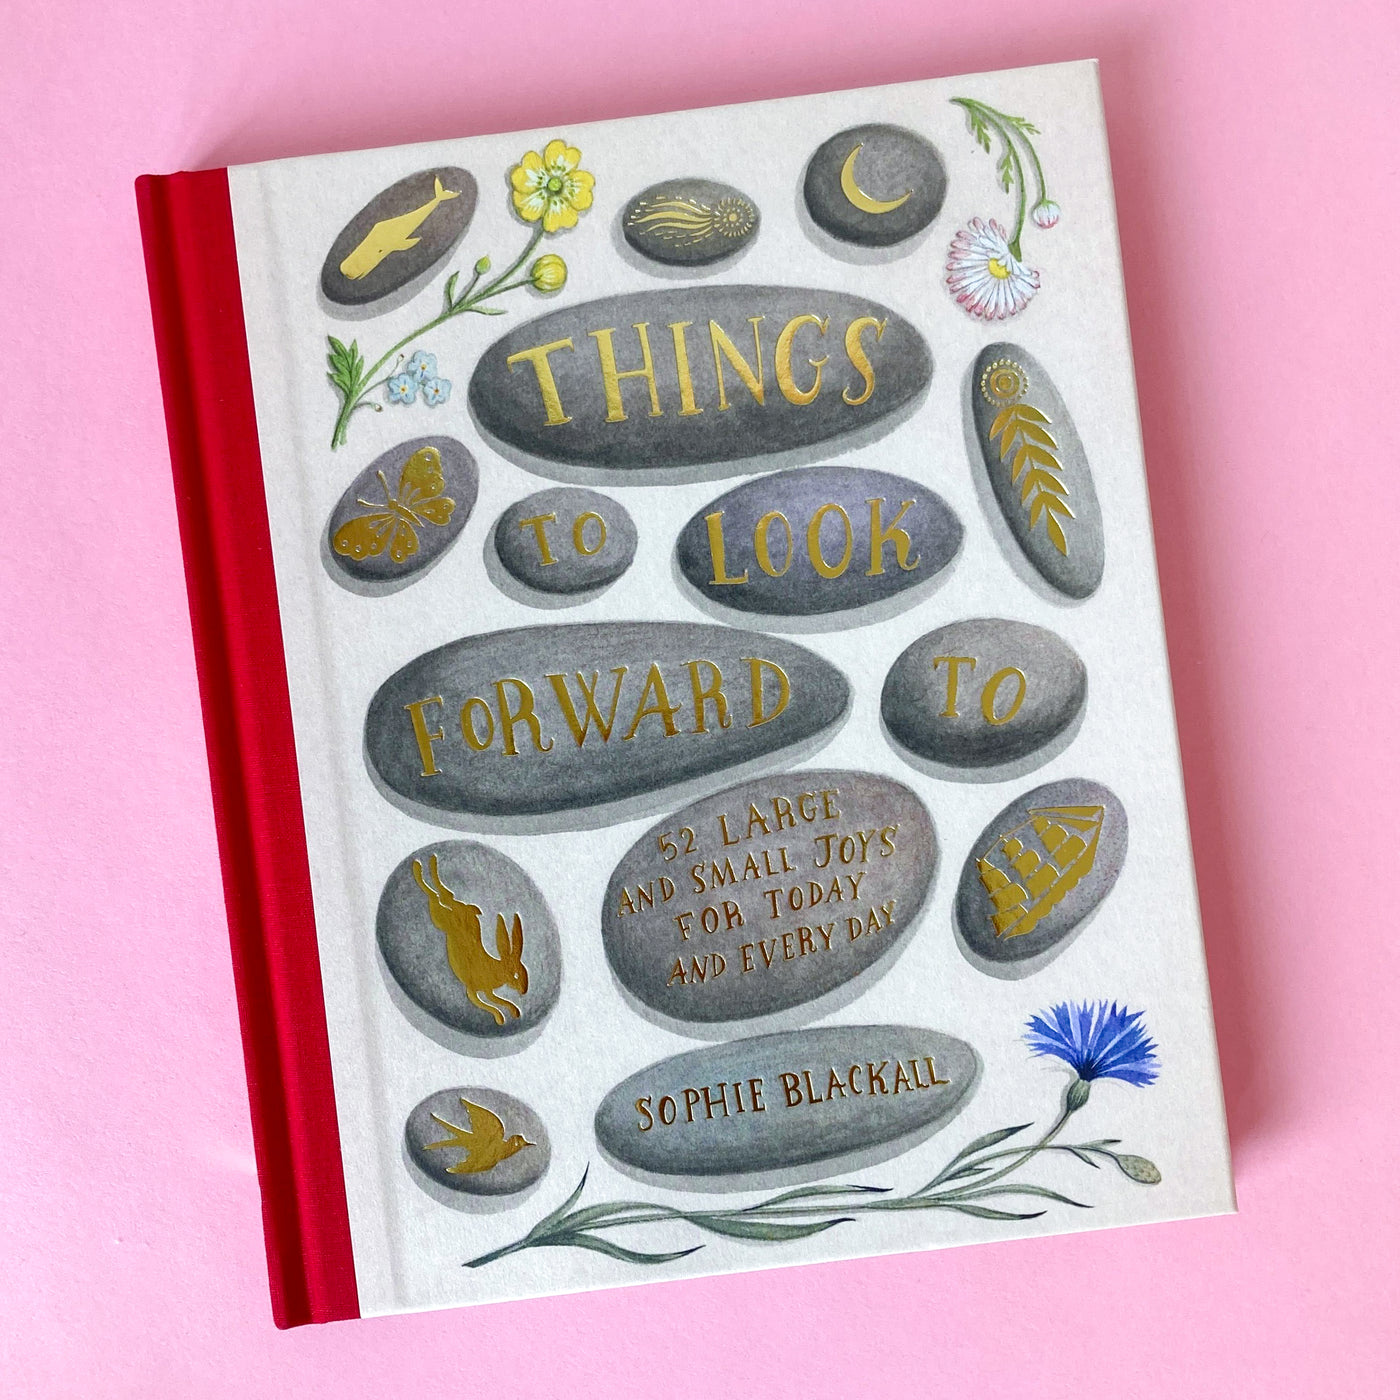 Things to Look Forward To: 52 Large and Small Joys for Today and Every Day by Sophie Blackall